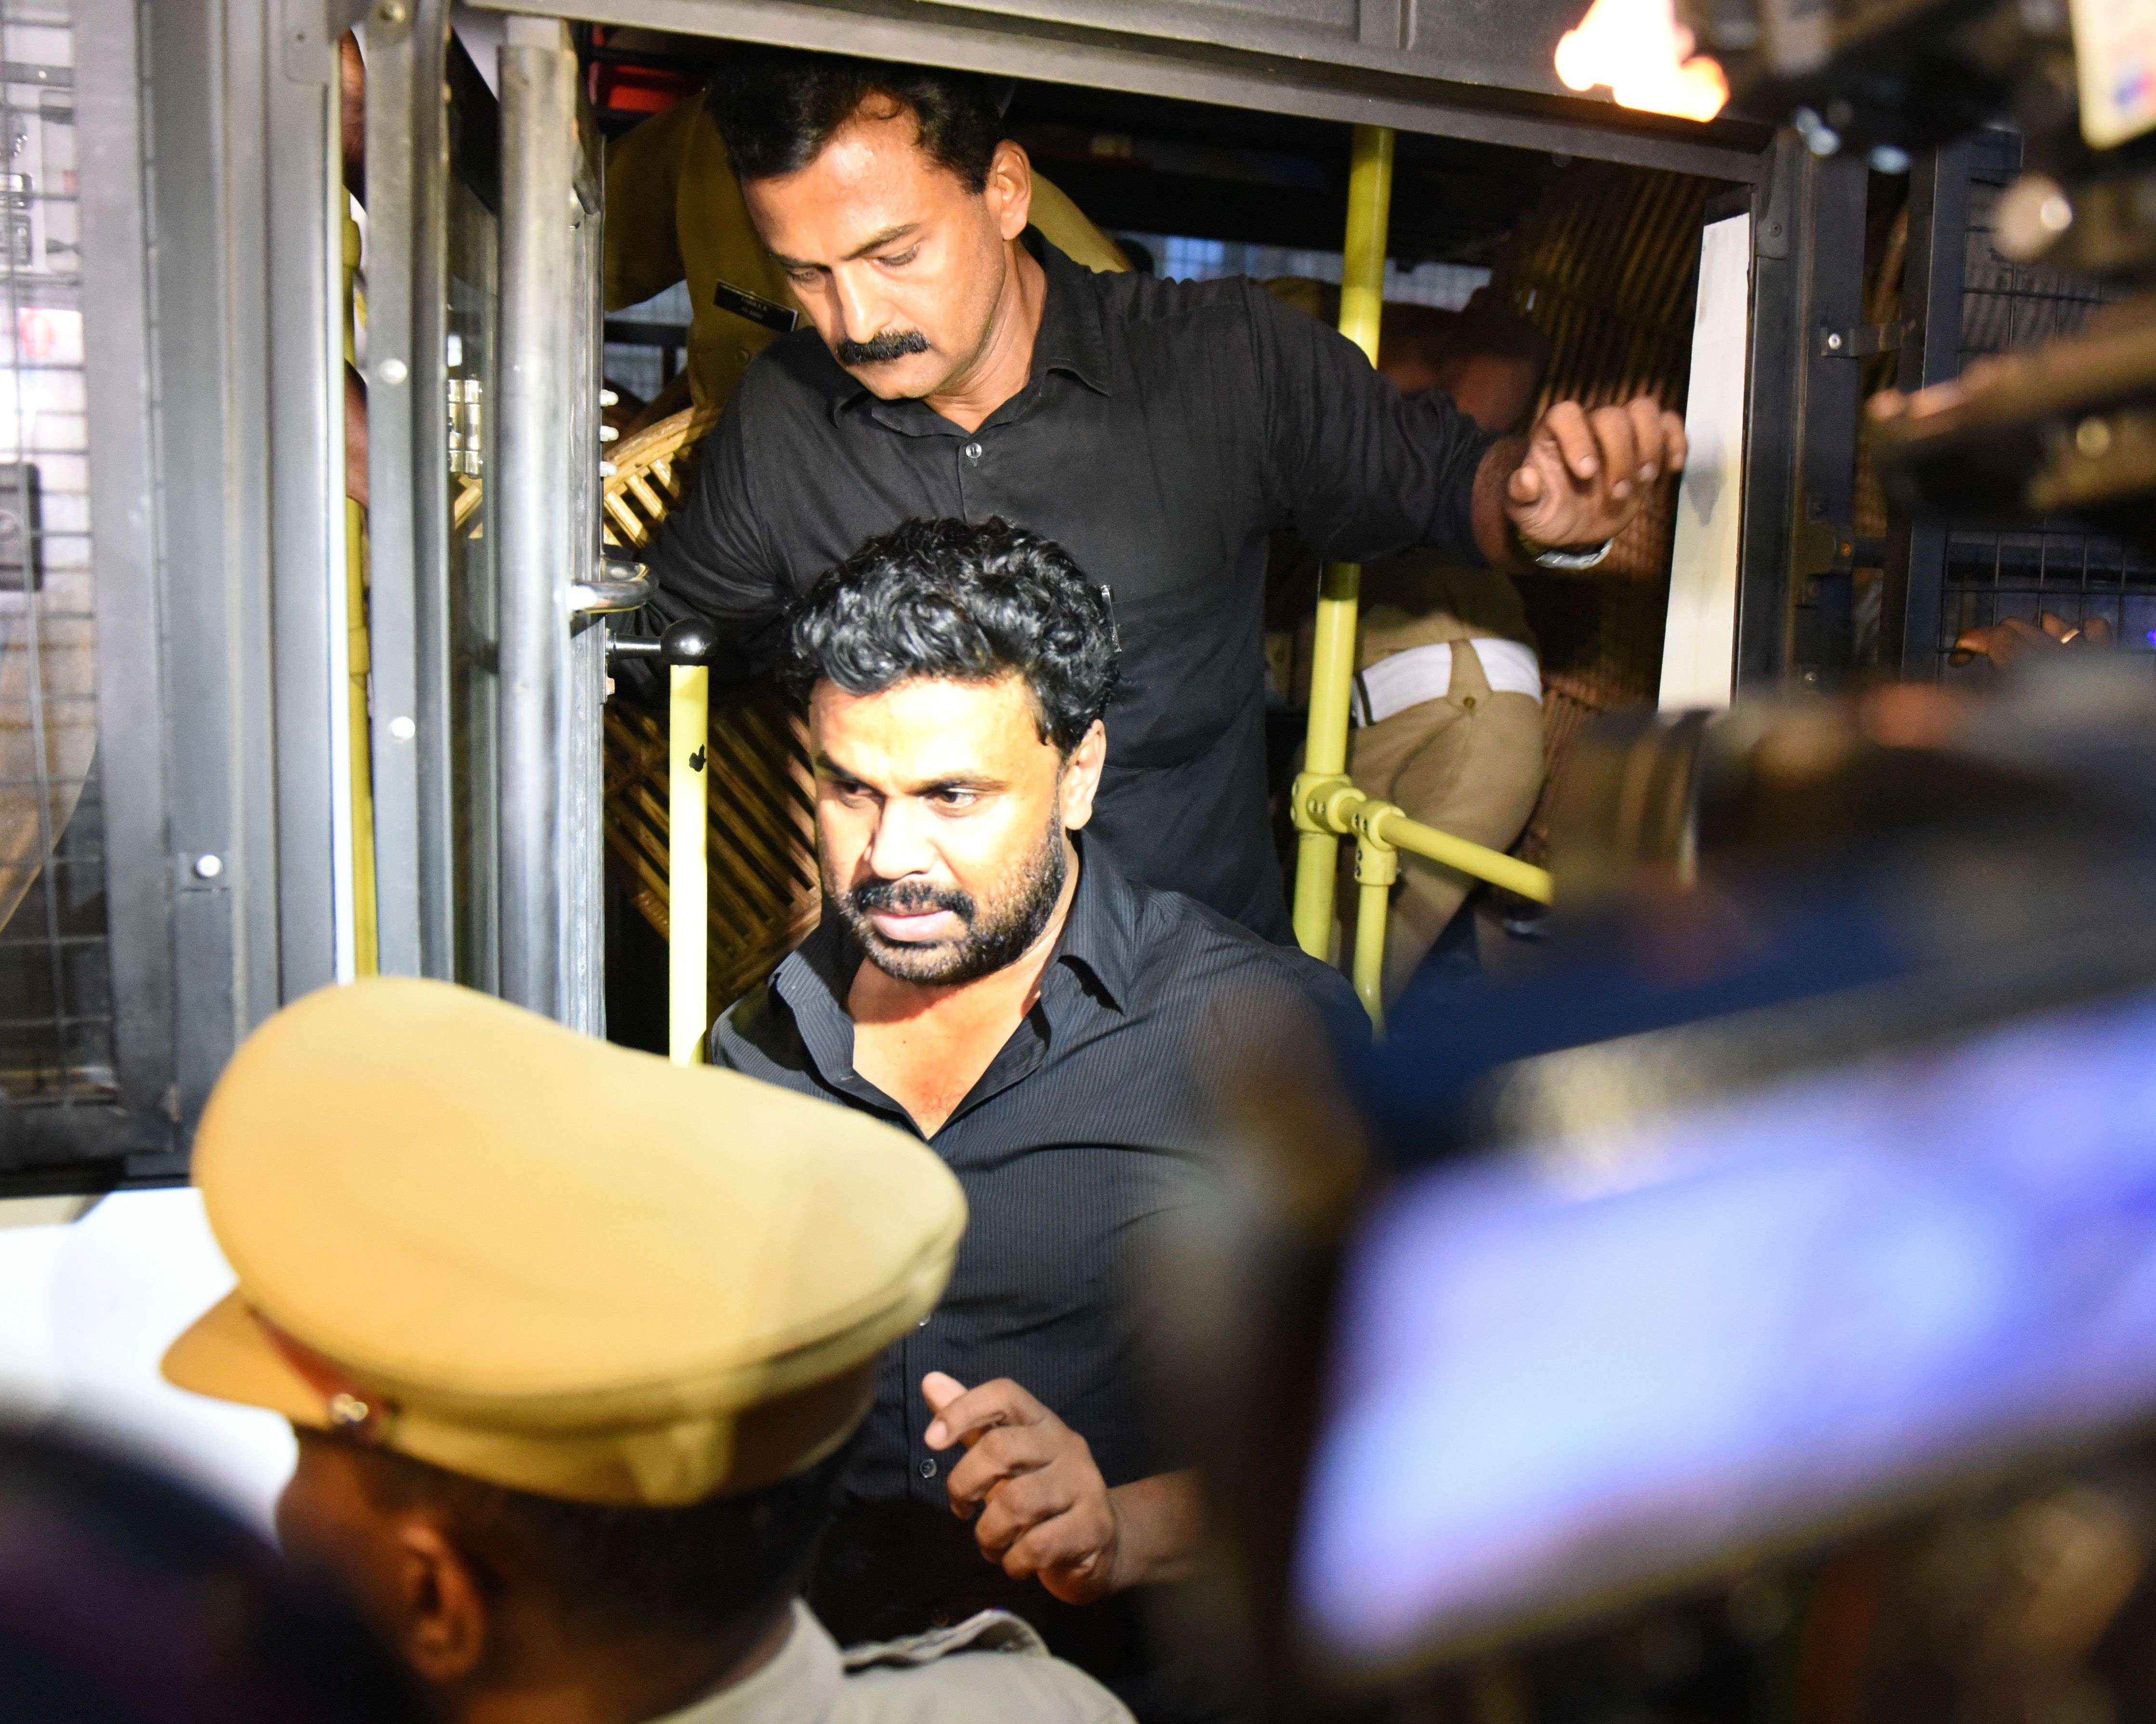 Malayalam actress abduction case: Dileep's kin turn to divine Judge Uncle seeking respite for actor